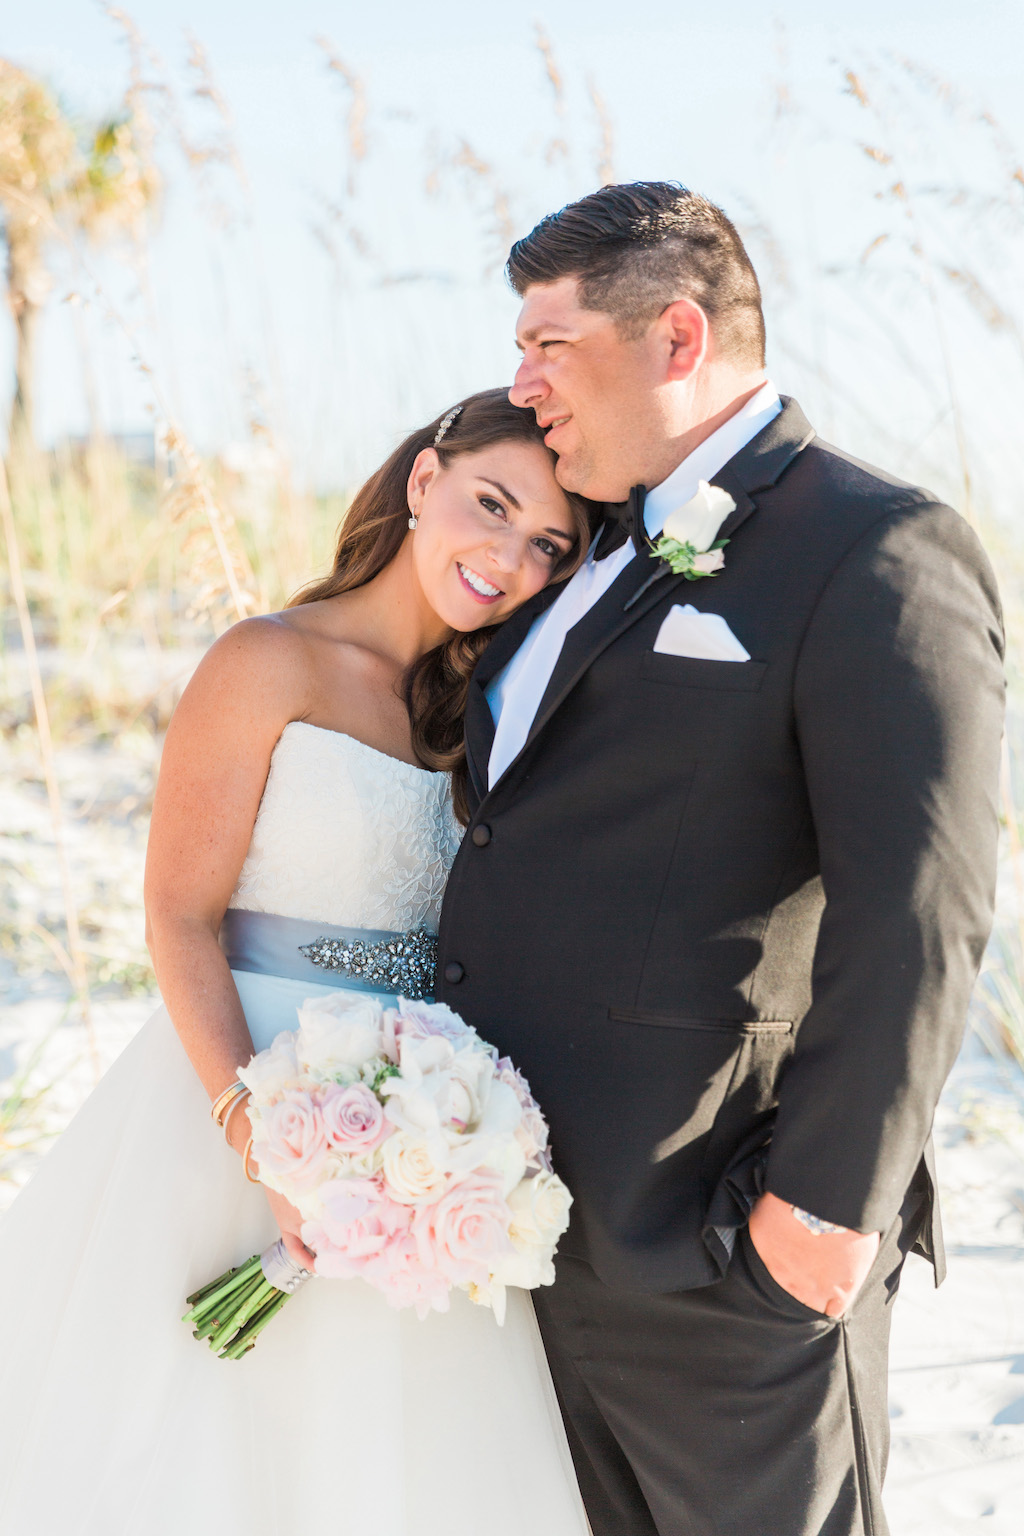 Outdoor Intimate Beach Bride and Groom Wedding Portrait in Ballgown Wedding Dress and Grey Sash with White and Pink Rose Bouquet, Groom in Black Tuxedo with White Floral Boutonniere